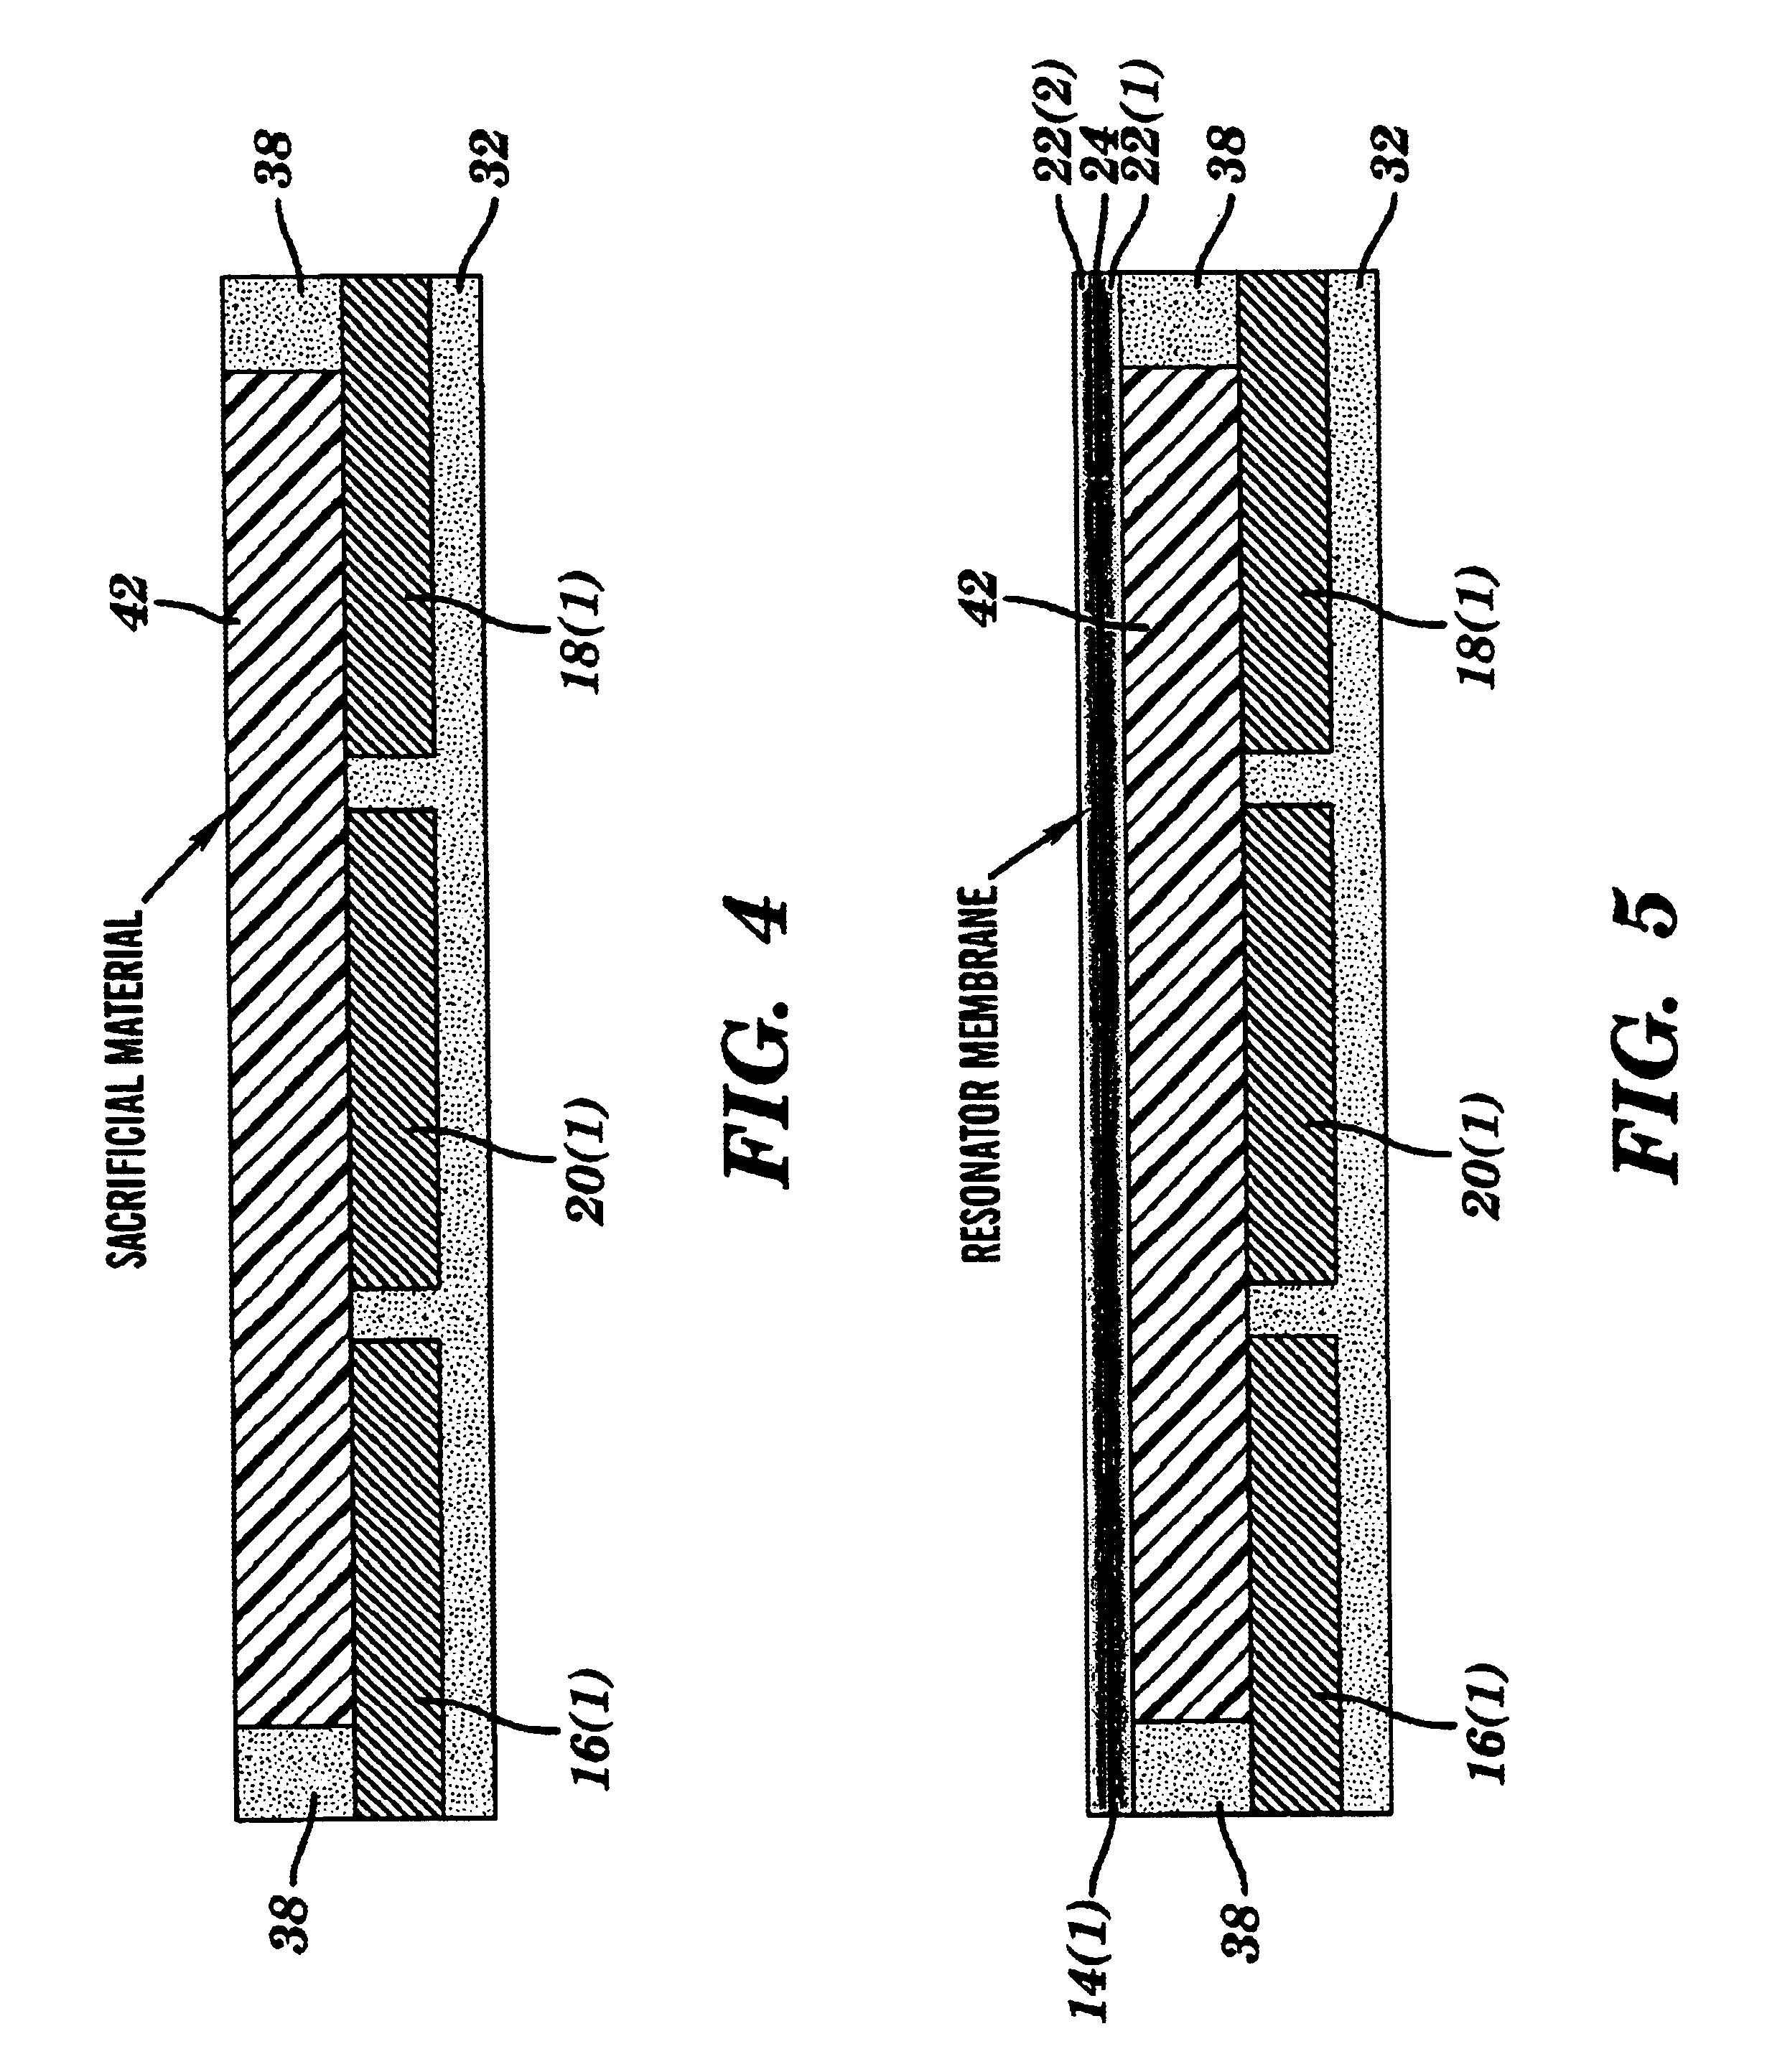 Biohazard sensing system and methods thereof